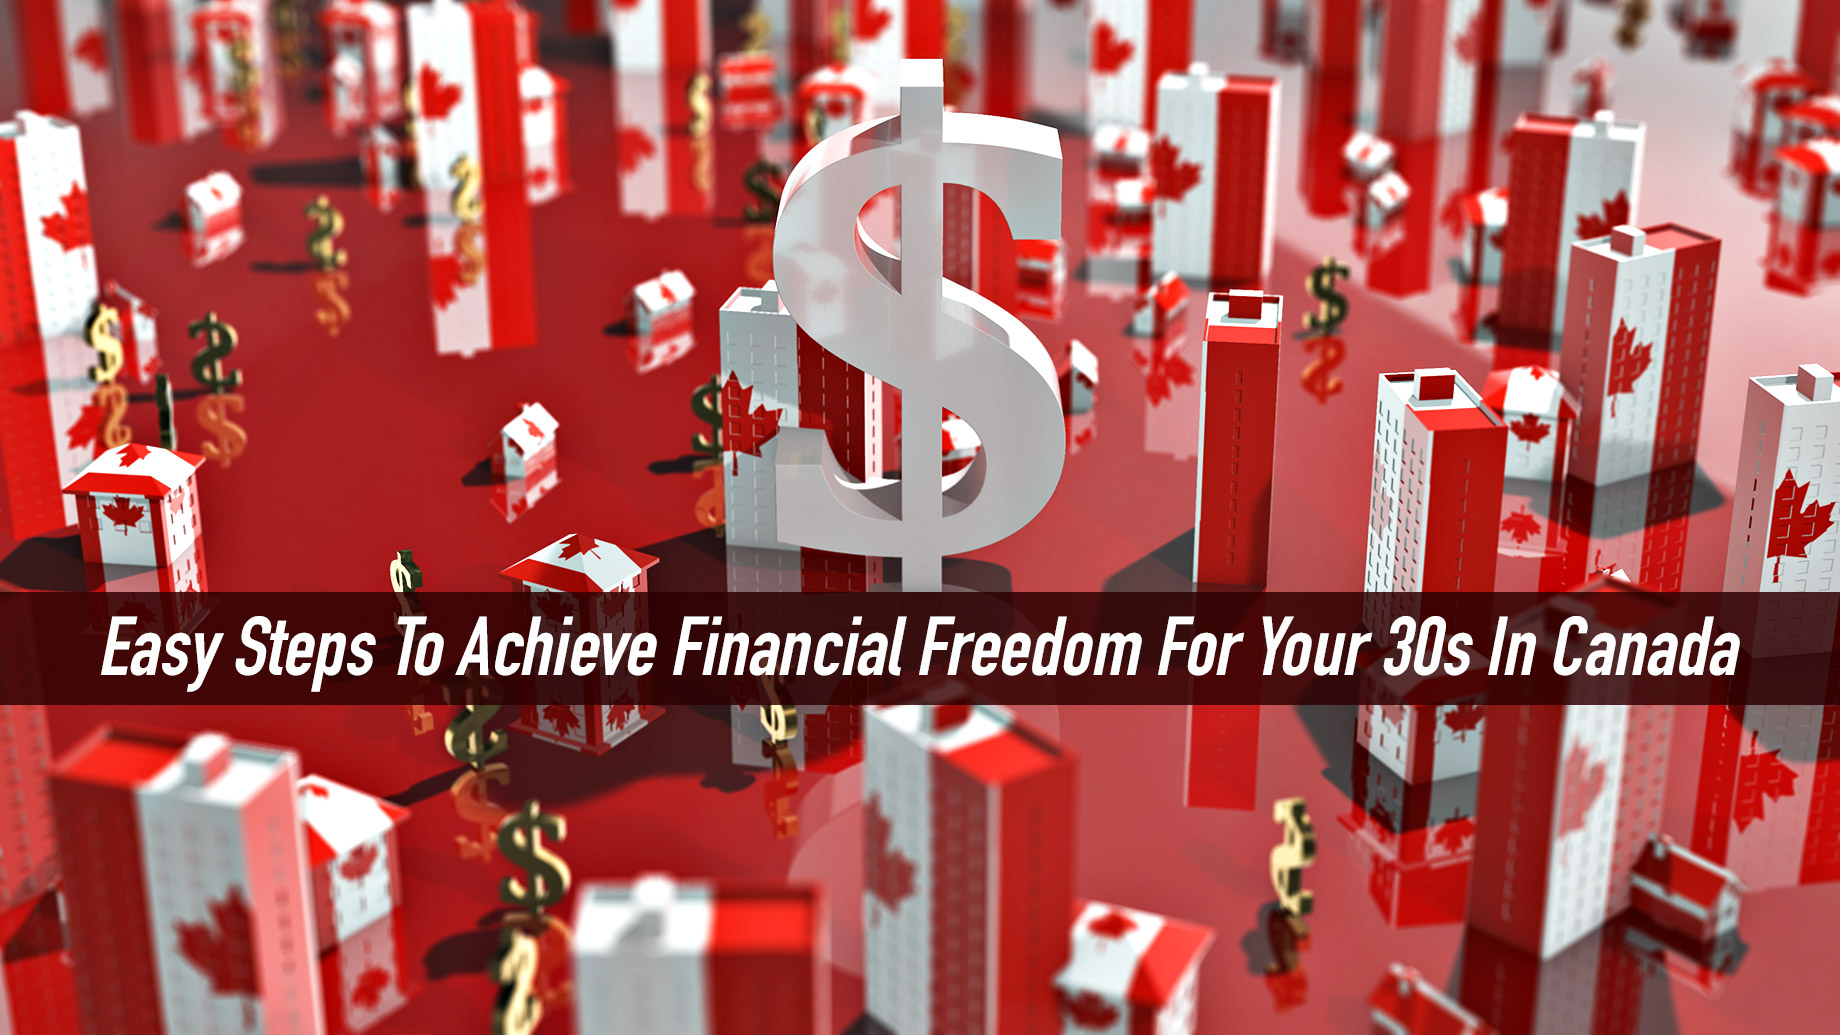 Easy Steps To Achieve Financial Freedom For Your 30s In Canada